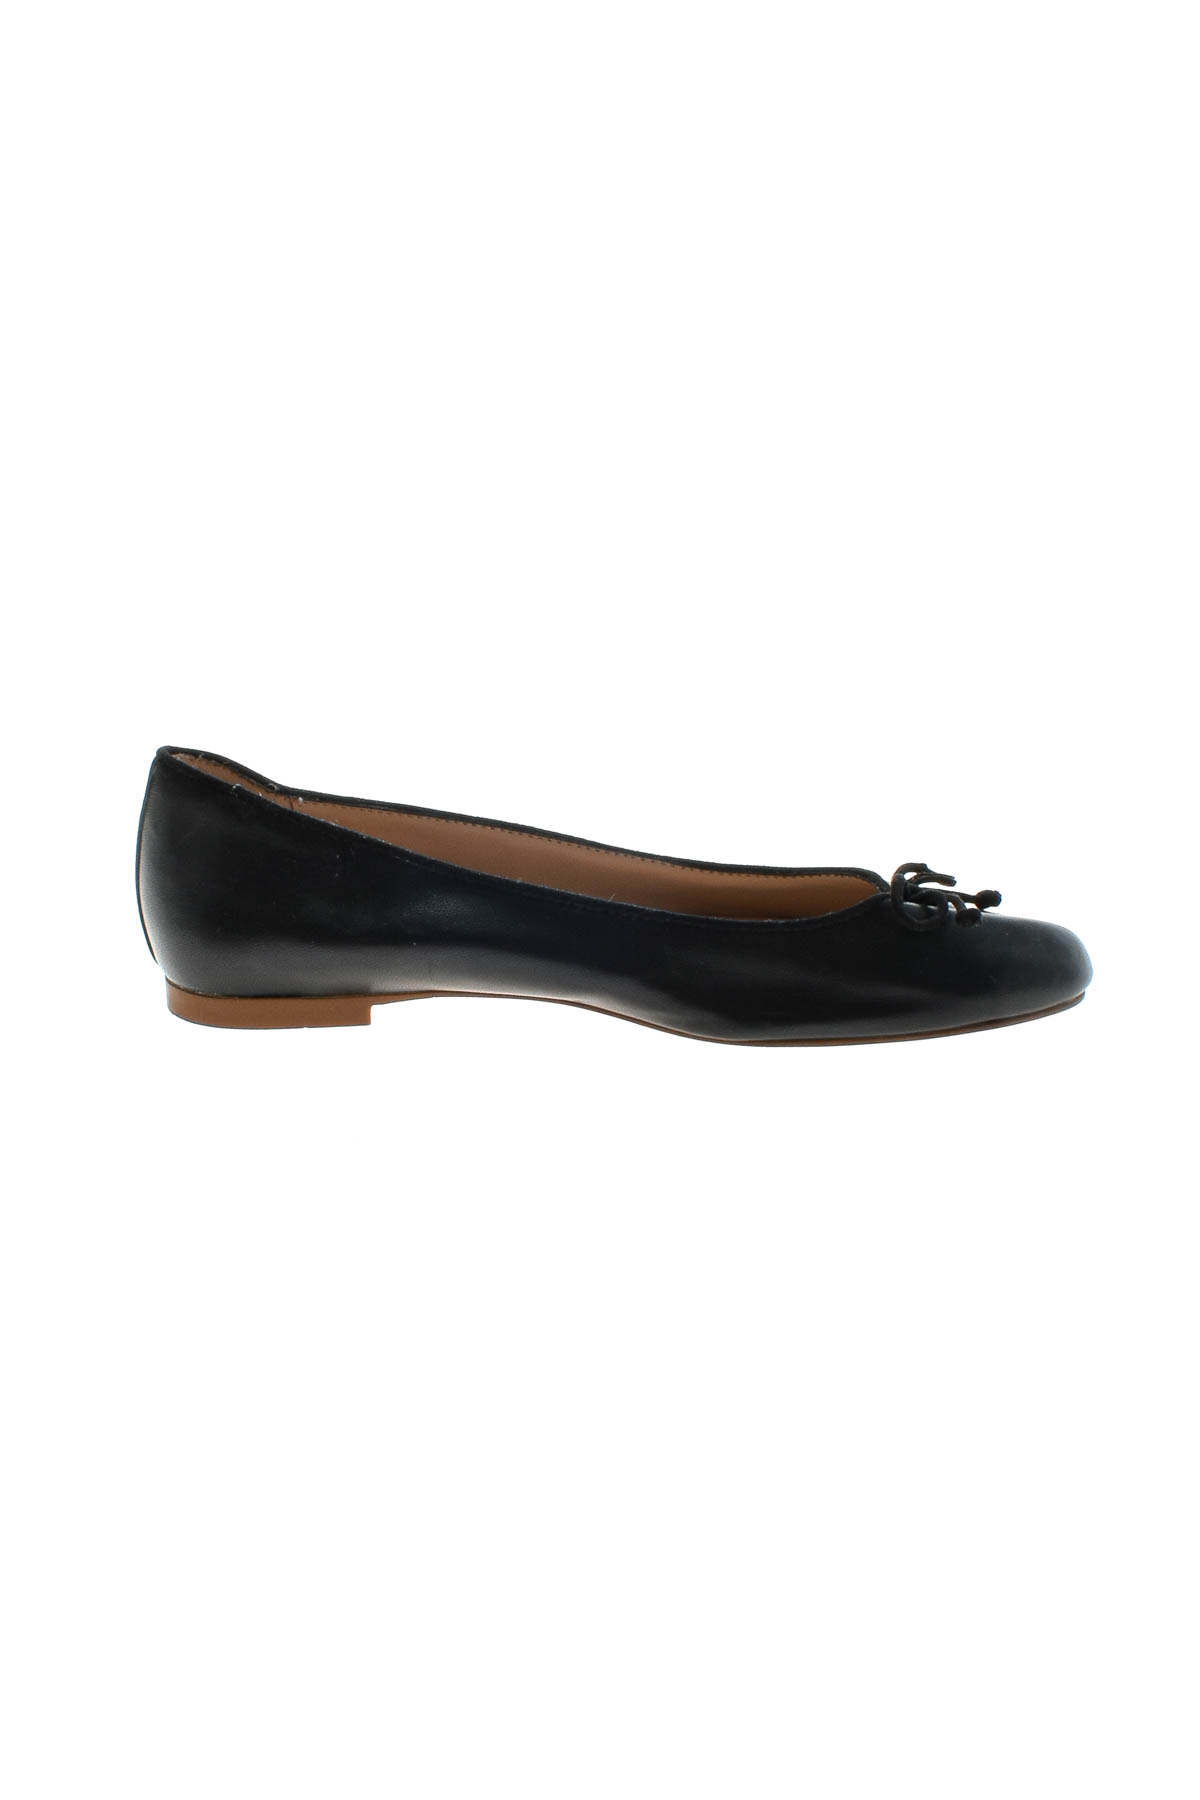 Women's Shoes - MNG - 2